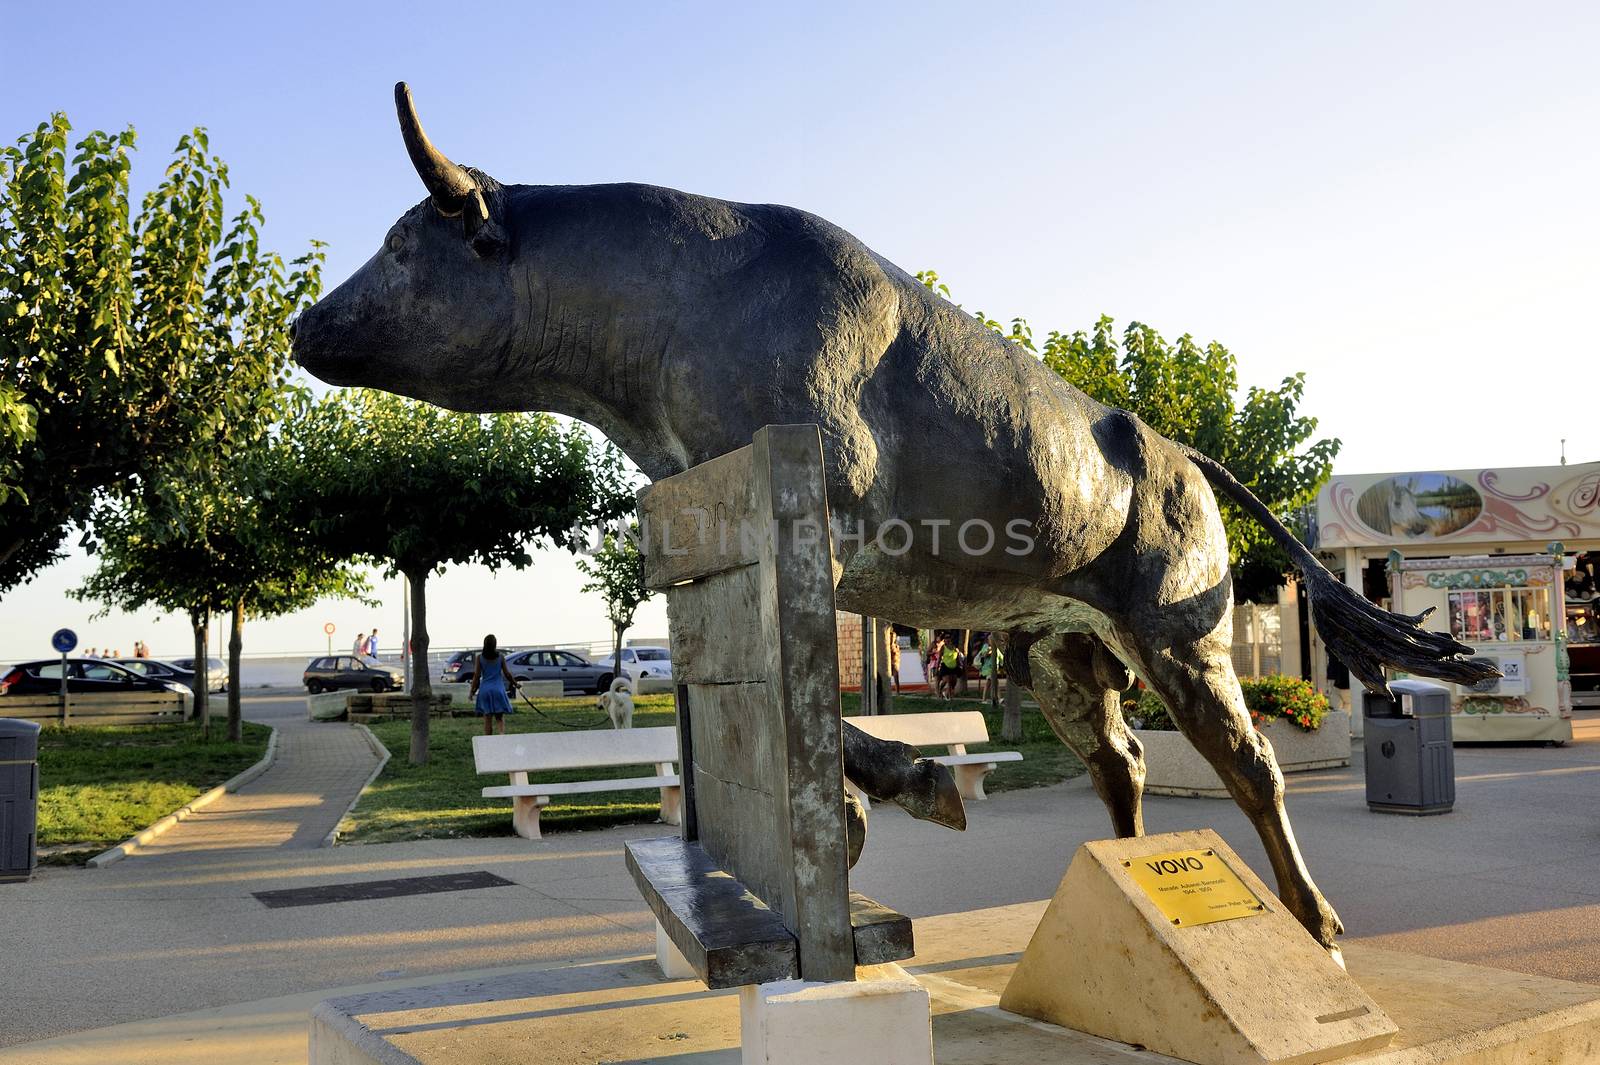 Vovo bull sculpture by gillespaire